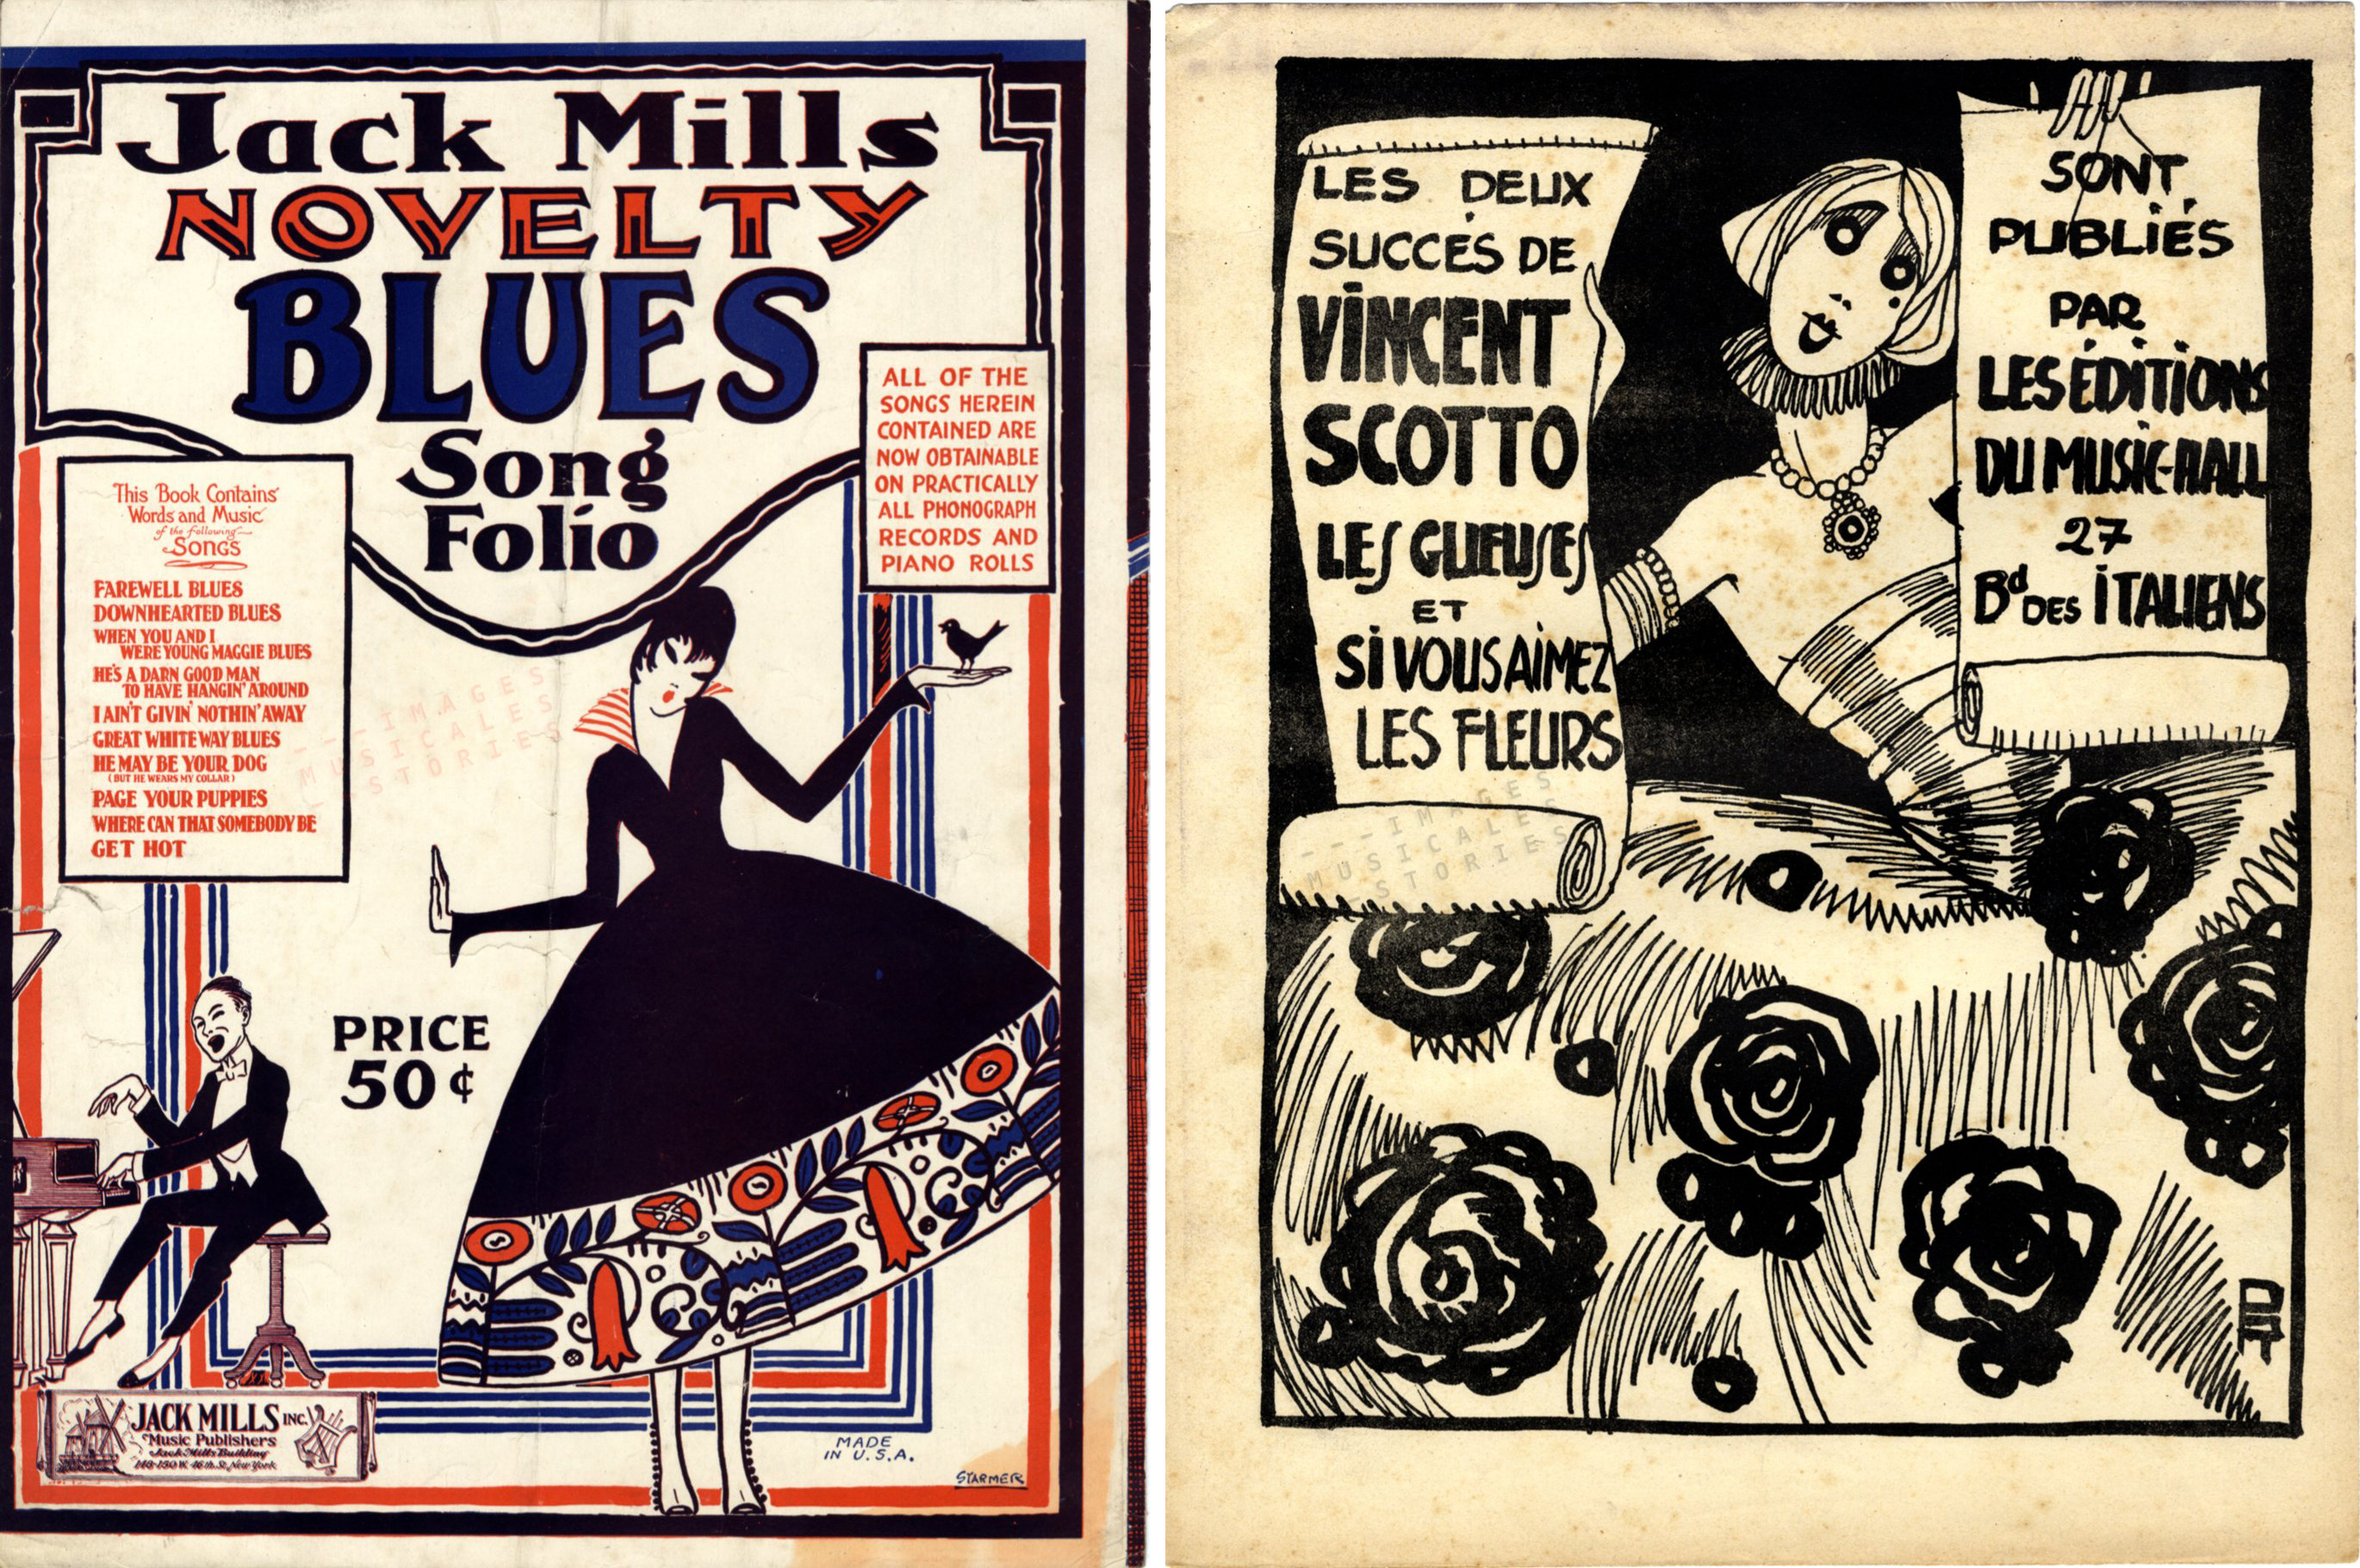 On both these back covers women in festive dress are charming us in viewing the music catalogs of publishers Jack Mills (left, illustrated by the Starmer brothers) and Les Editions du Music-Hall (right, illustrated by Pol Rab)